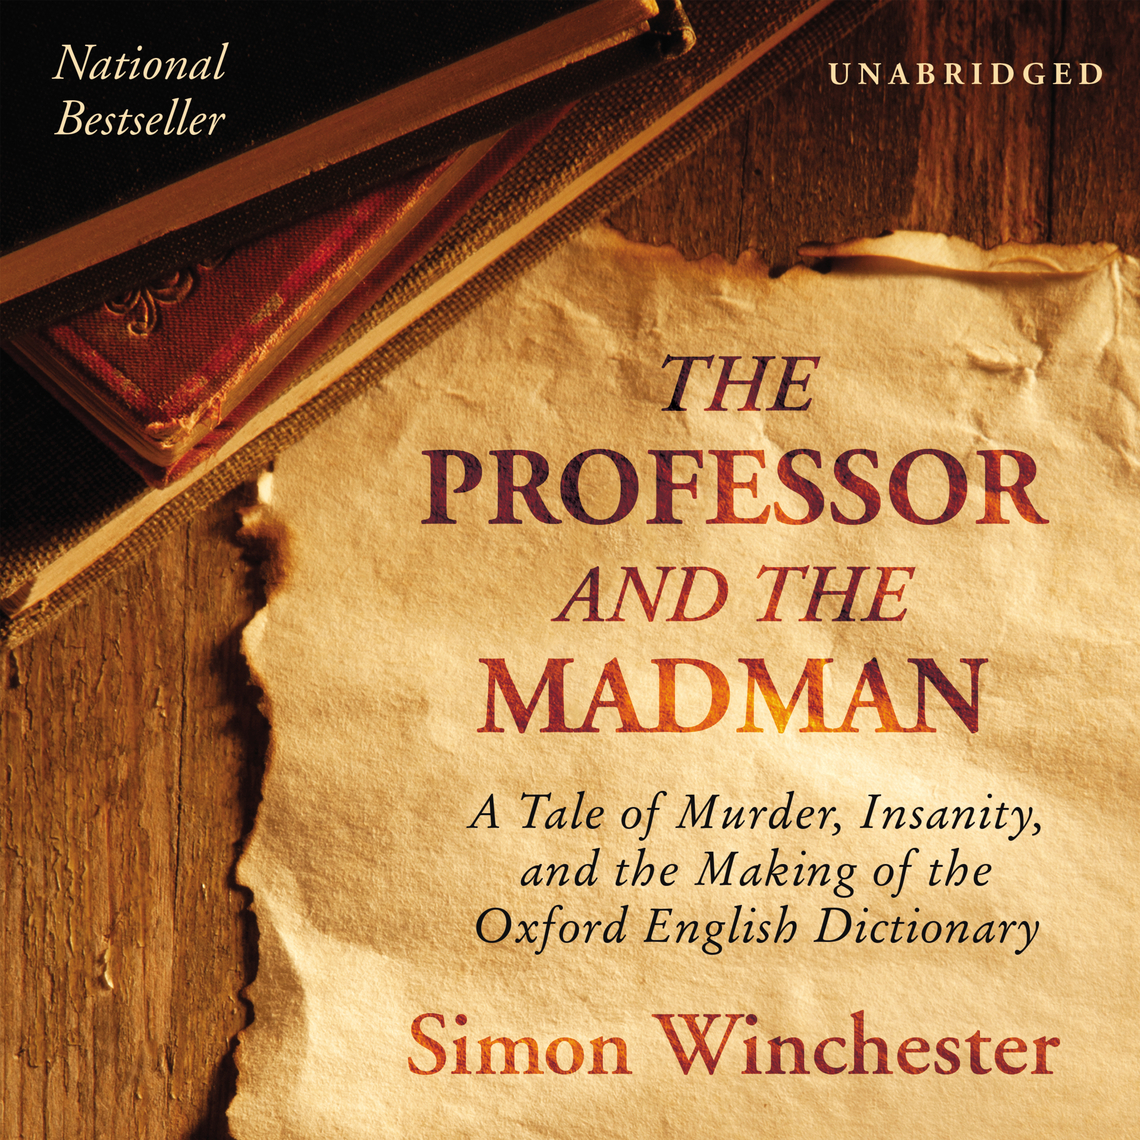 The Professor and The Madman by Simon Winchester pic